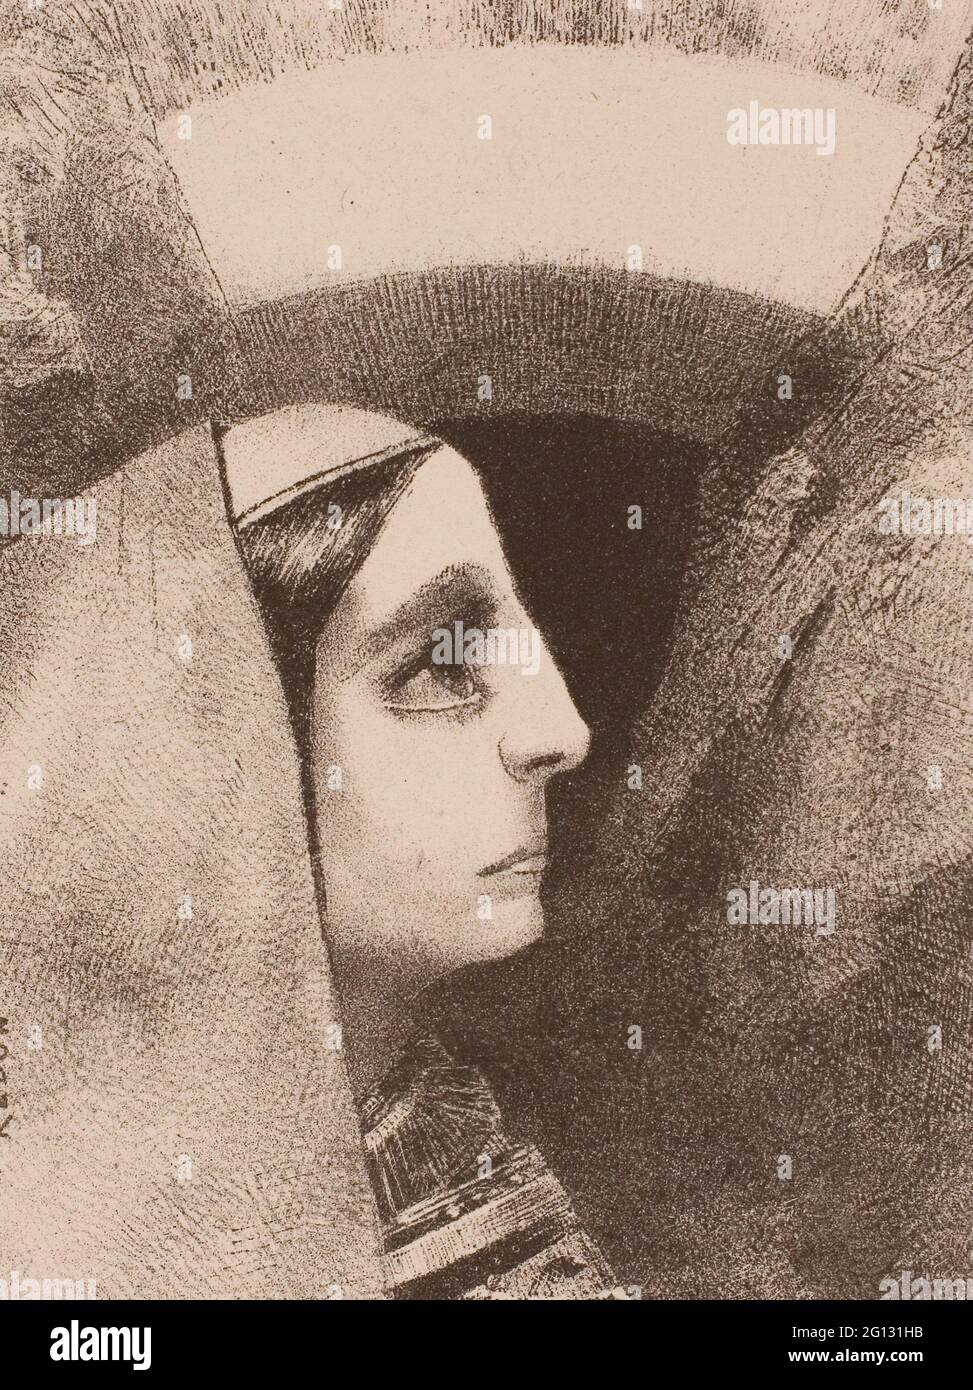 Odilon Redon. Before the Black Sun of Melancholy, Lenore Appears, plate two from To Edgar Poe - 1882 - Odilon Redon French, 1840-1916. Lithograph in Stock Photo